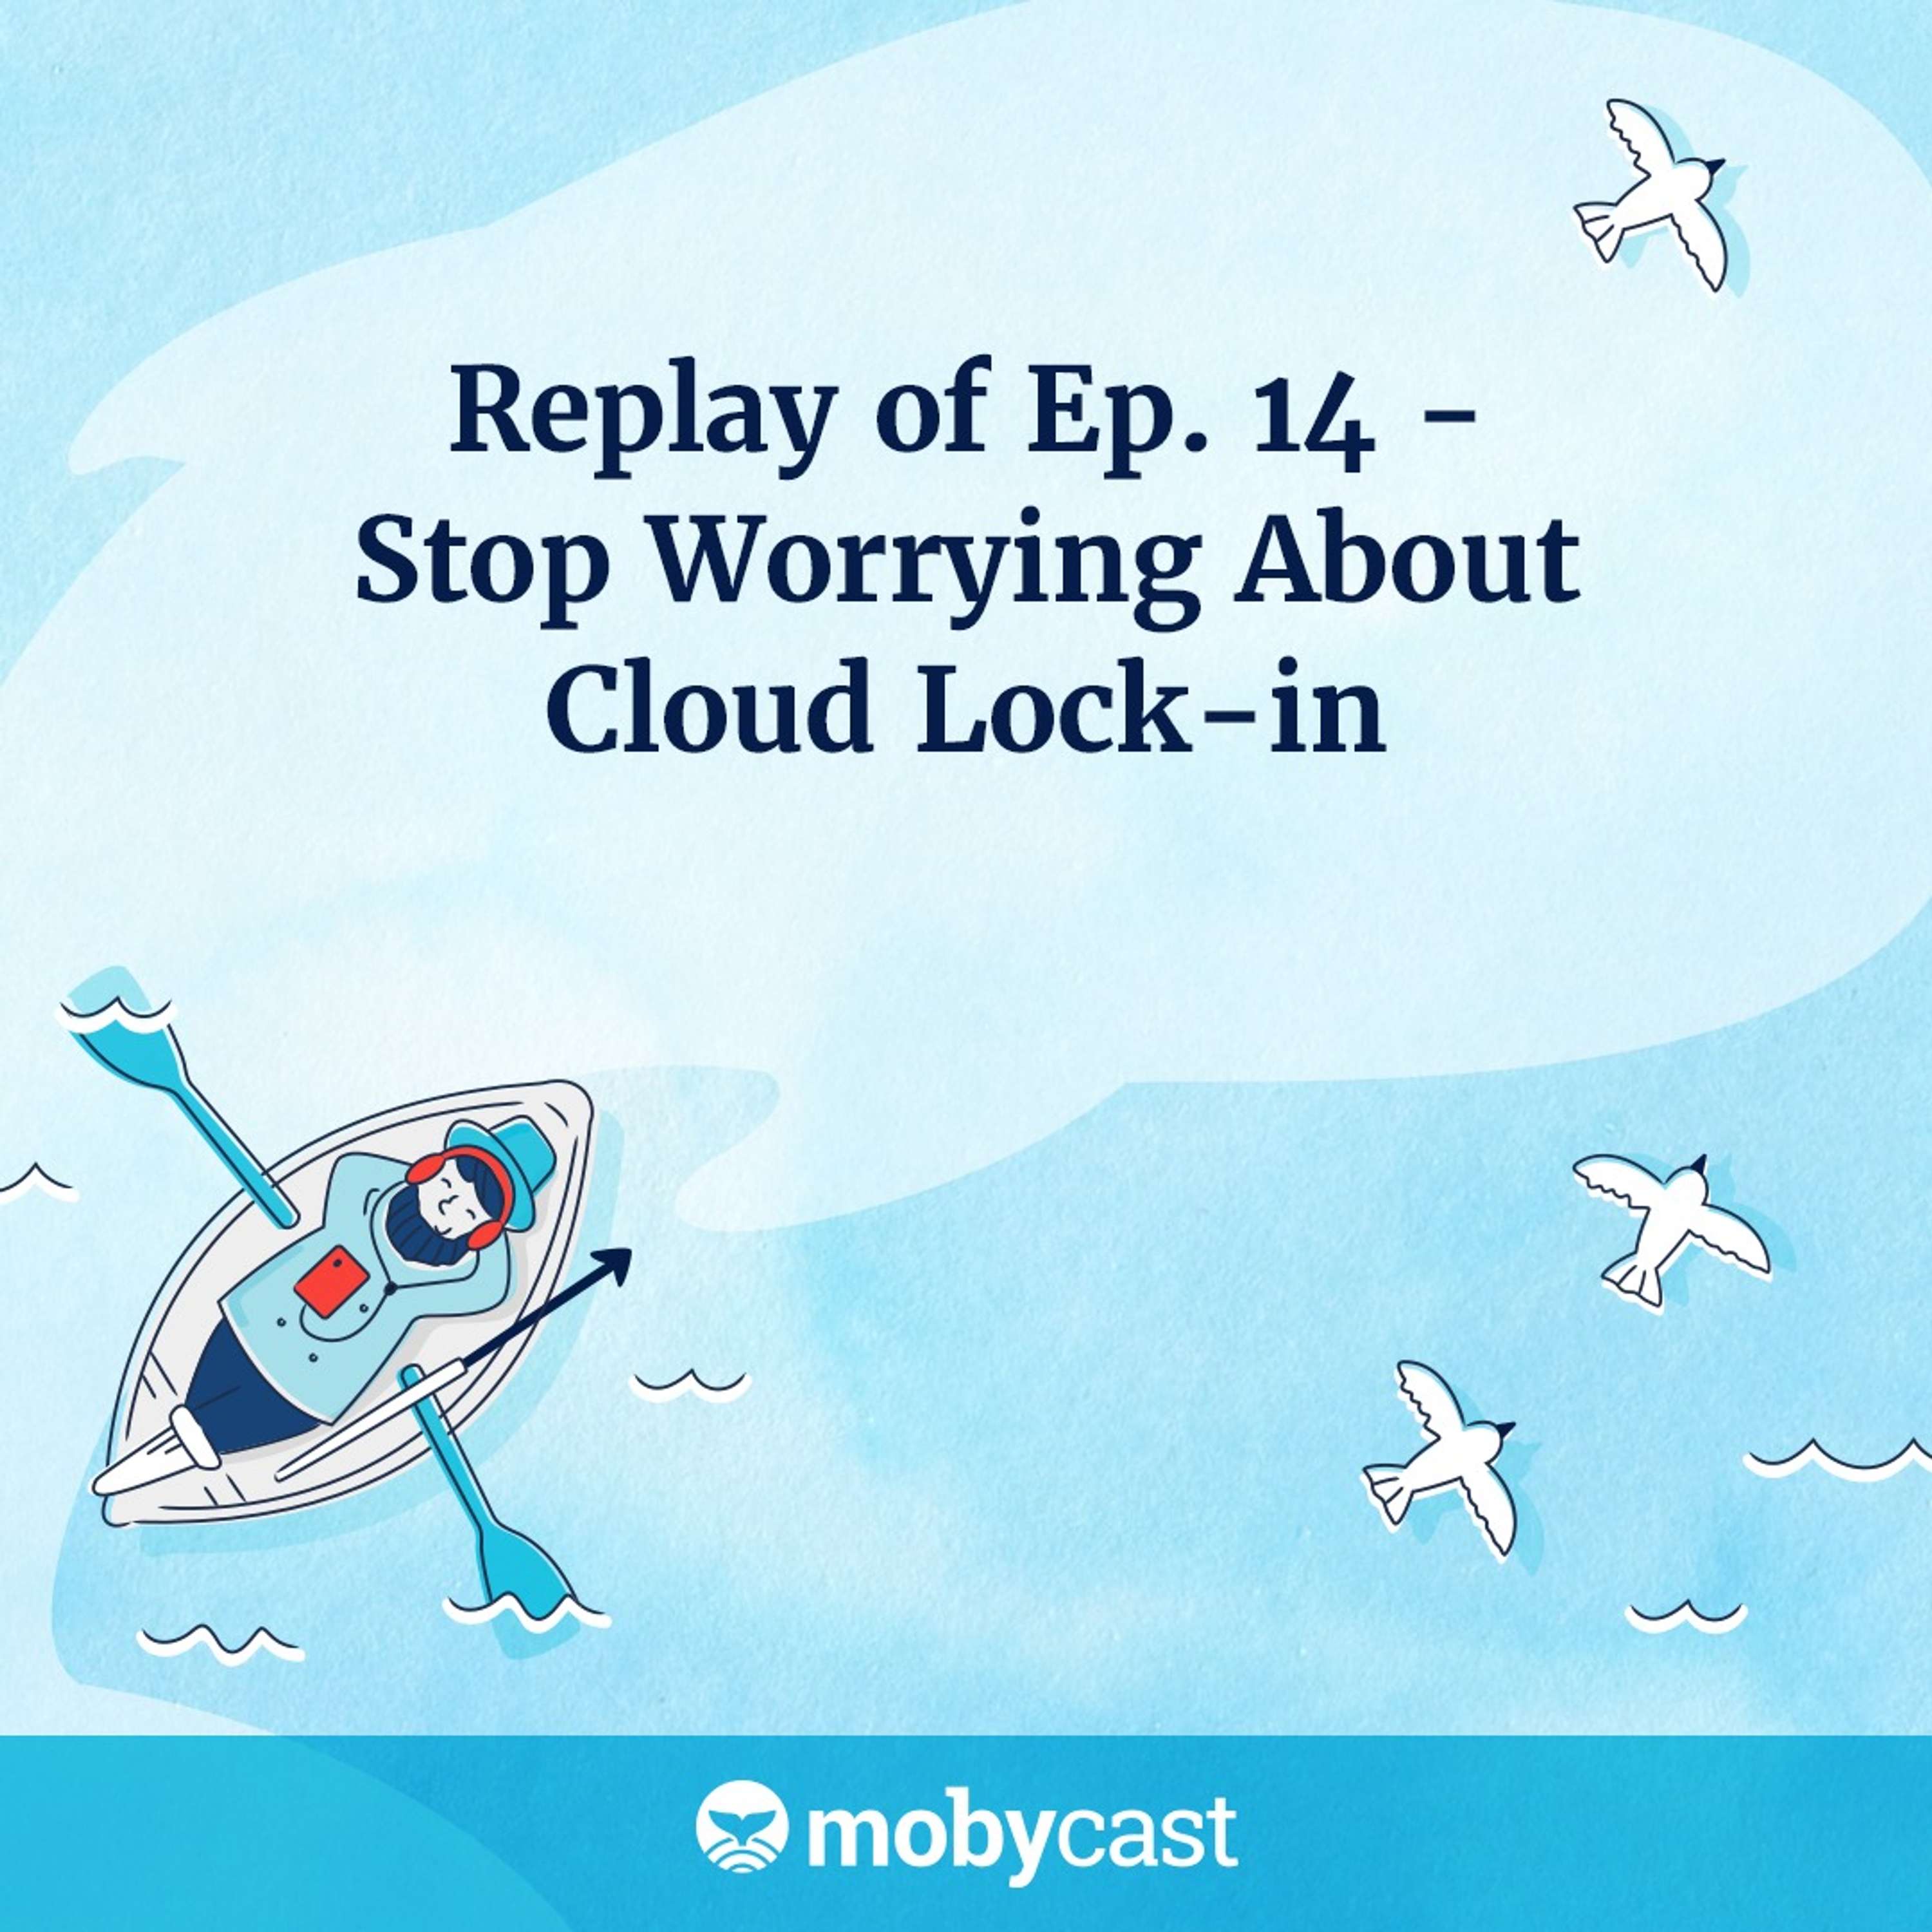 Replay of Ep 14. Stop Worrying About Cloud Lock-in